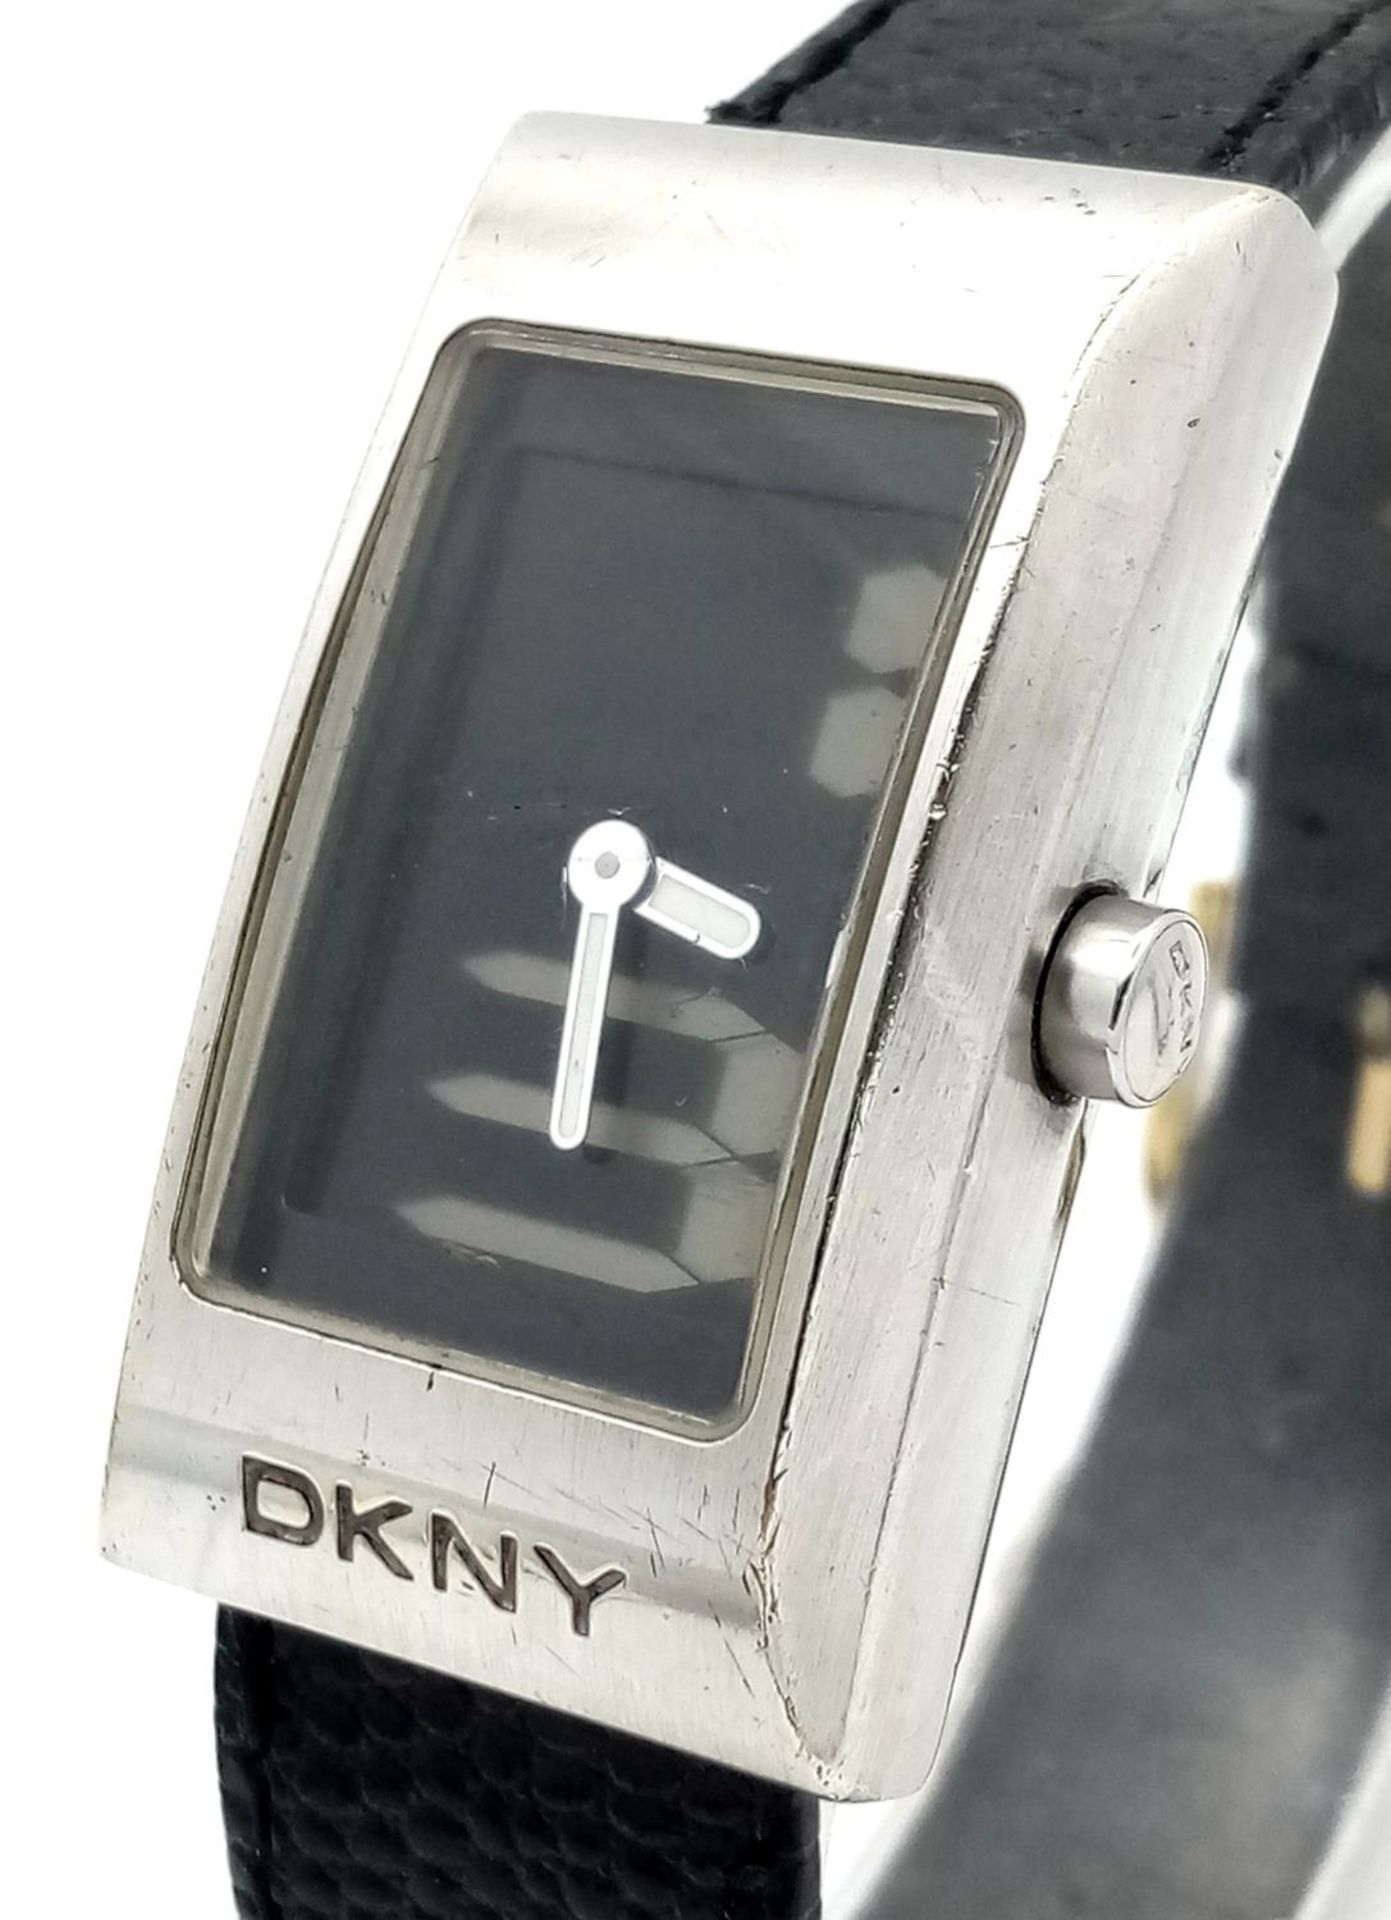 A DKNY Quartz Ladies Watch. Black leather strap. Stainless steel case - 24mm. Analogue/digital dial. - Image 2 of 6